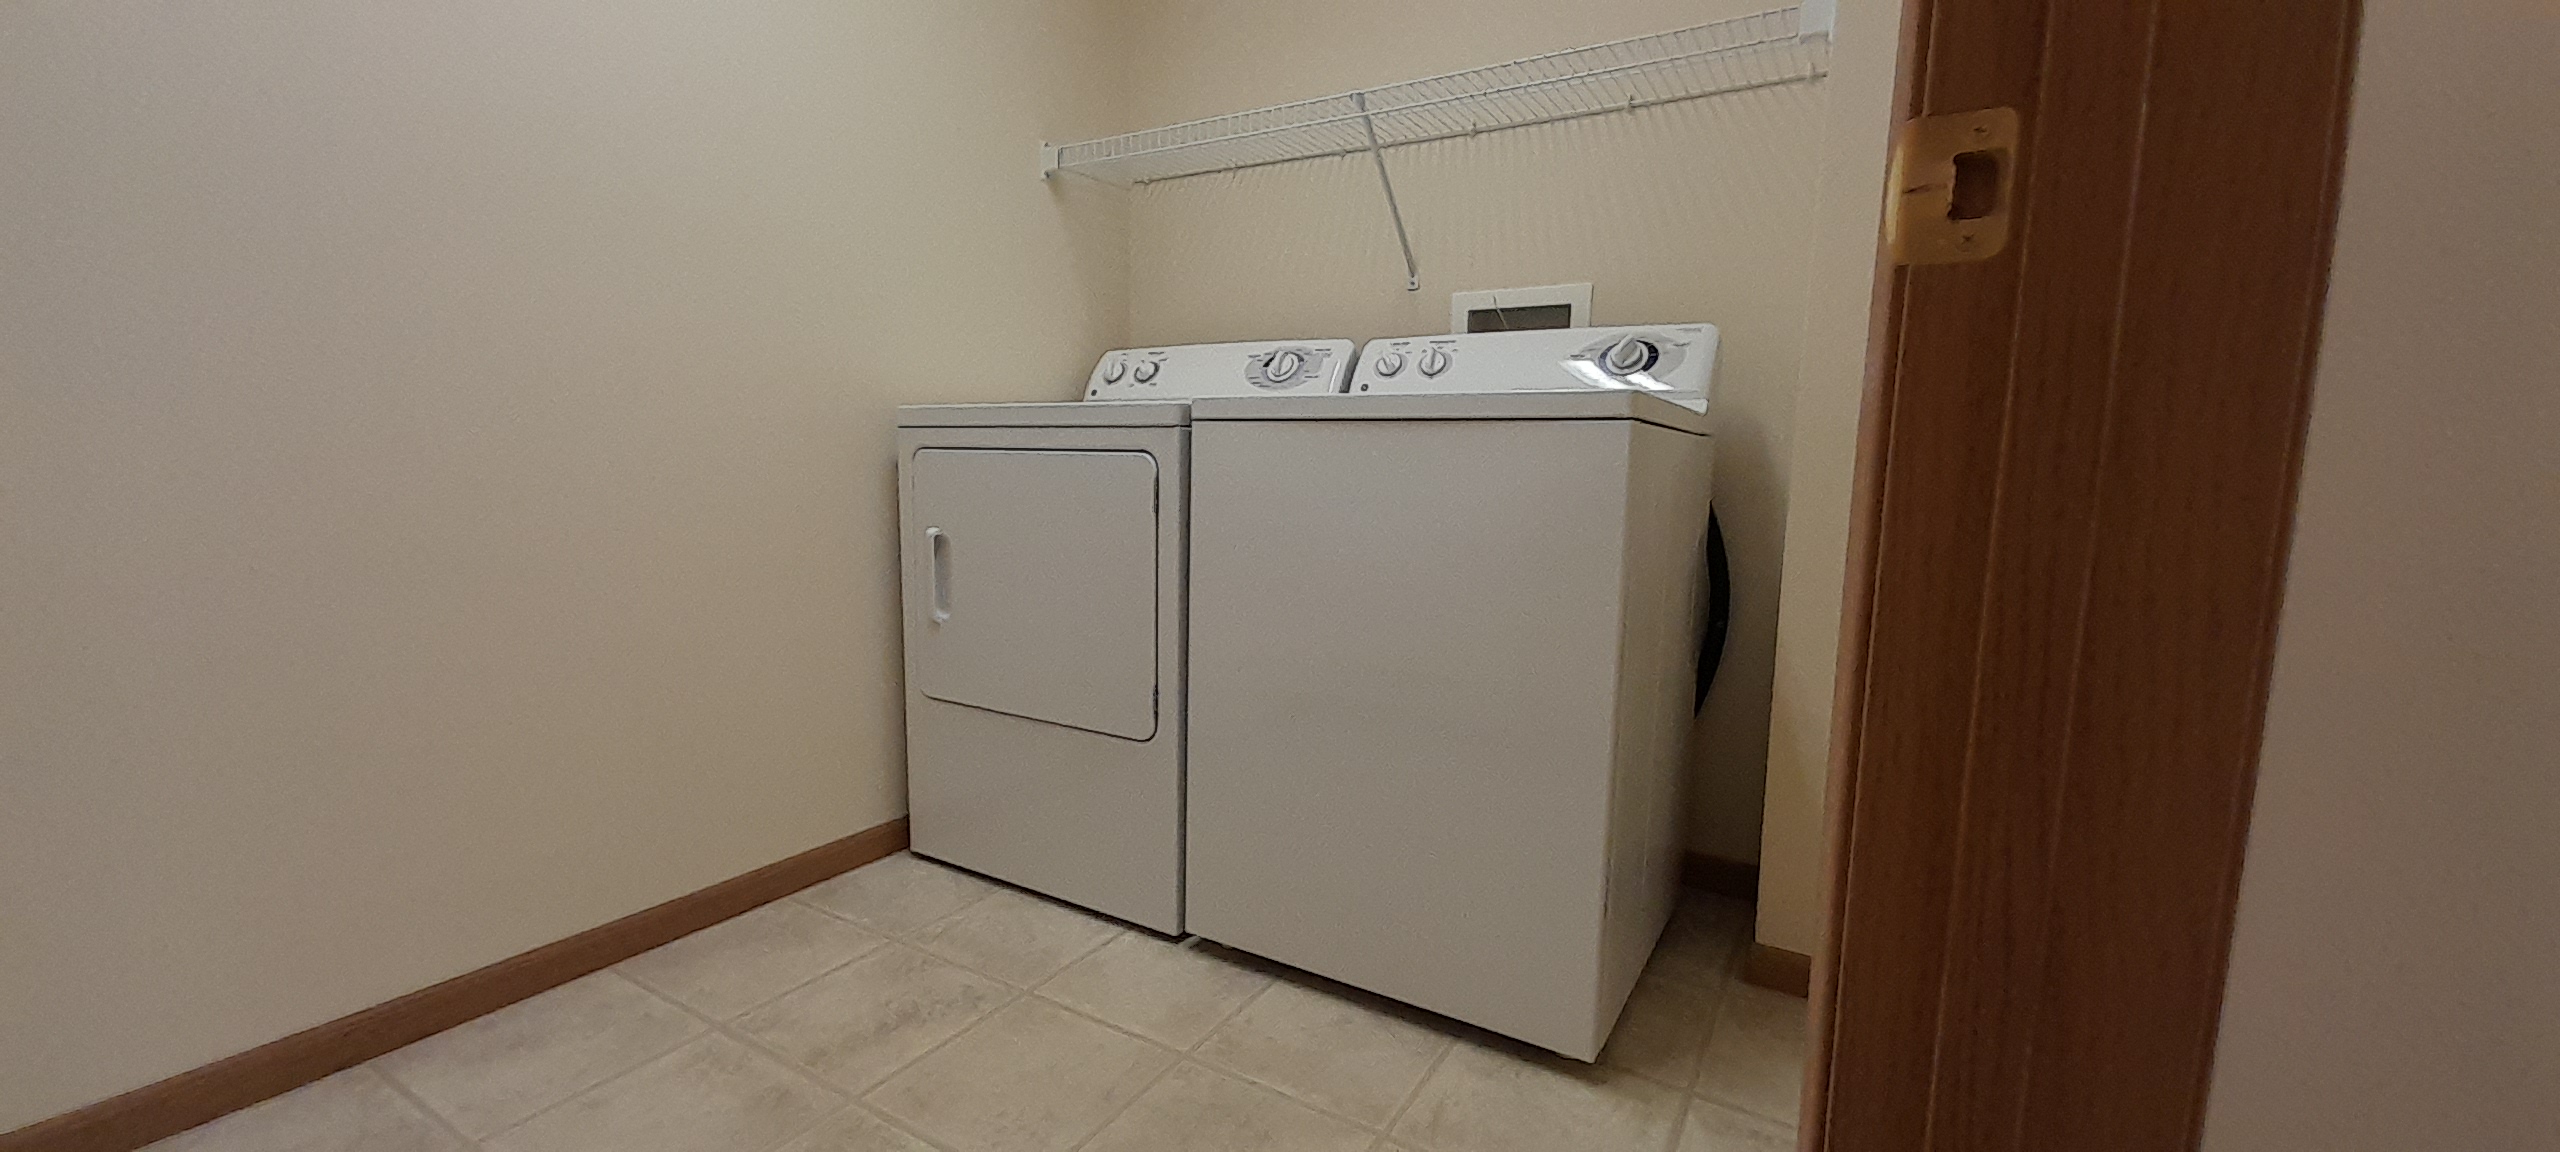 Iola SV washer and dryer